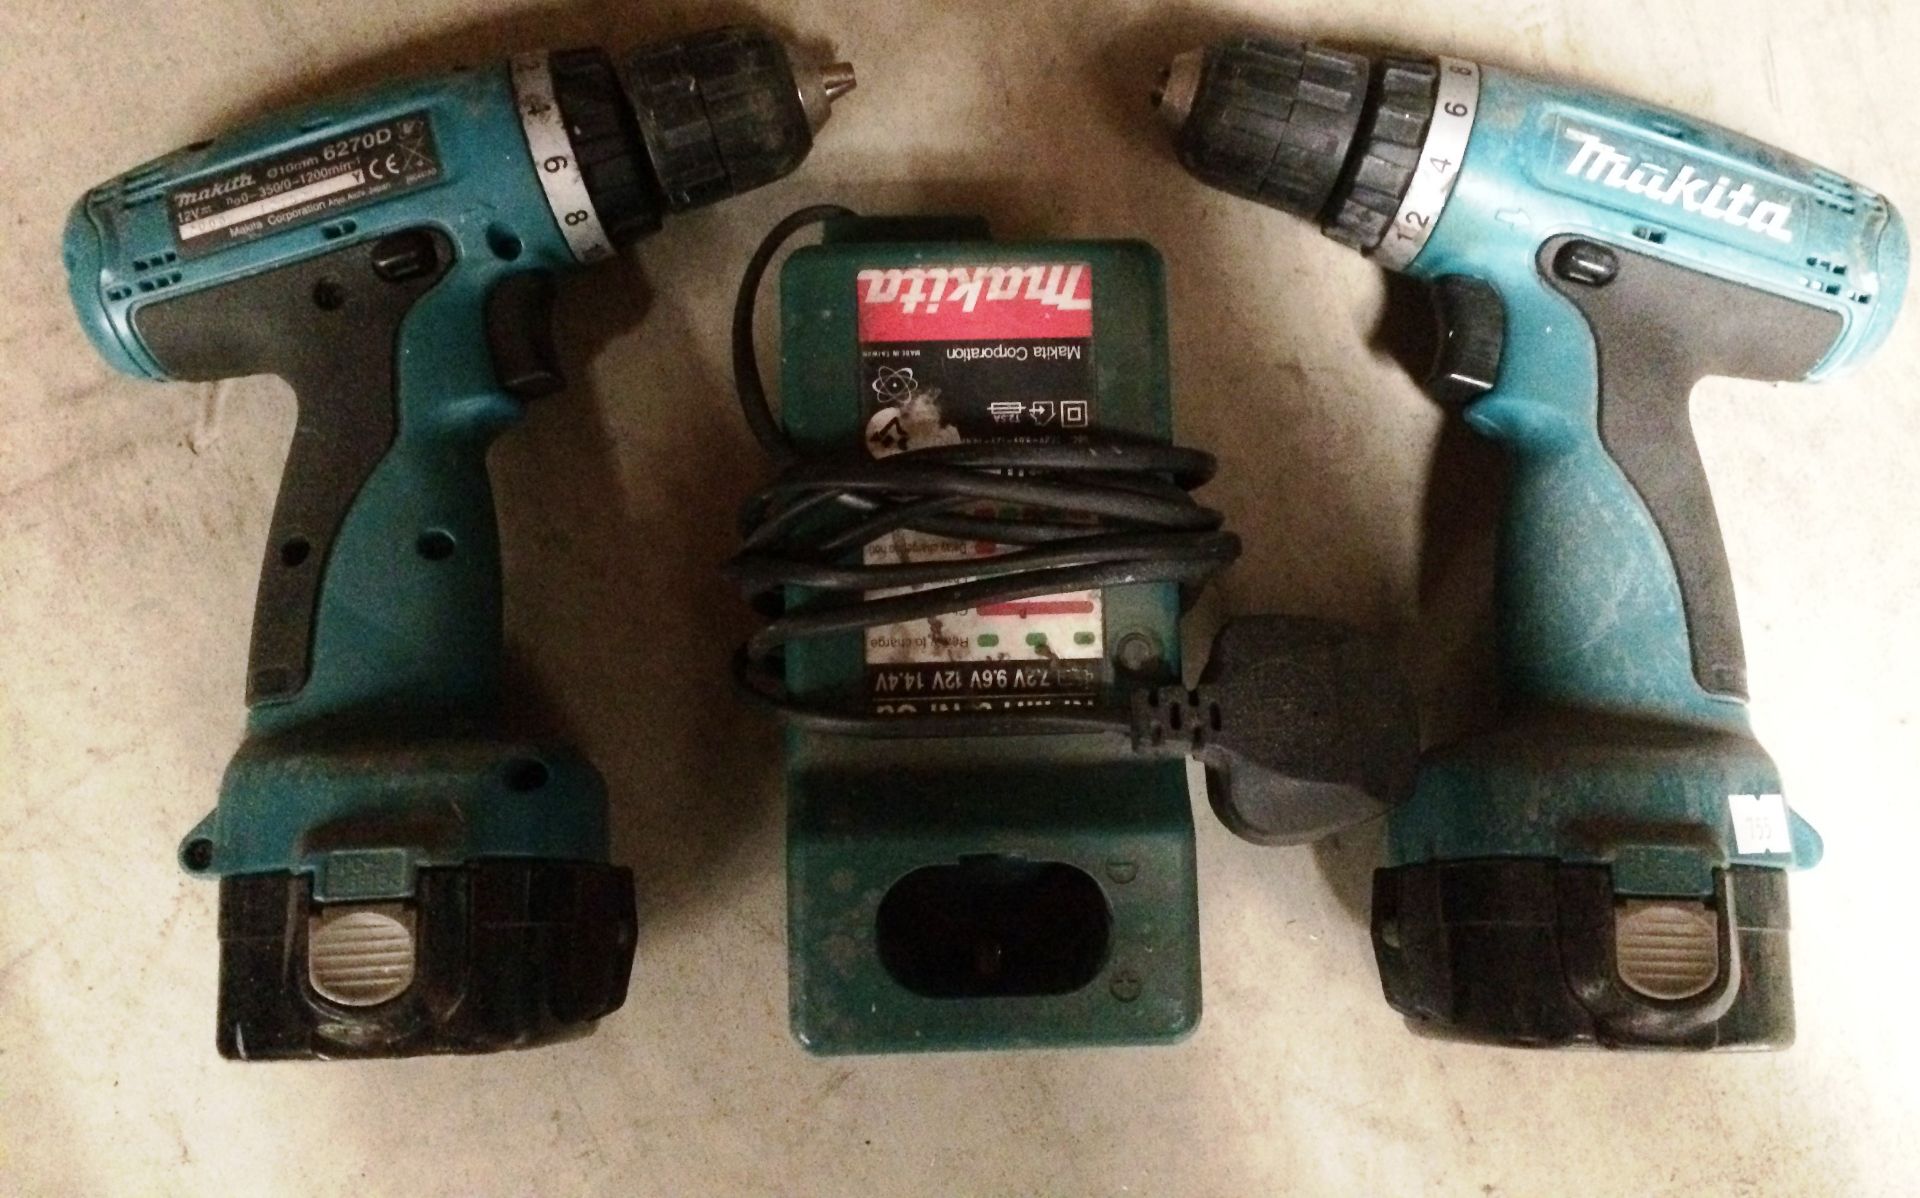 Two x Makita 6270D 12V cordless drills complete with two batteries and one charger